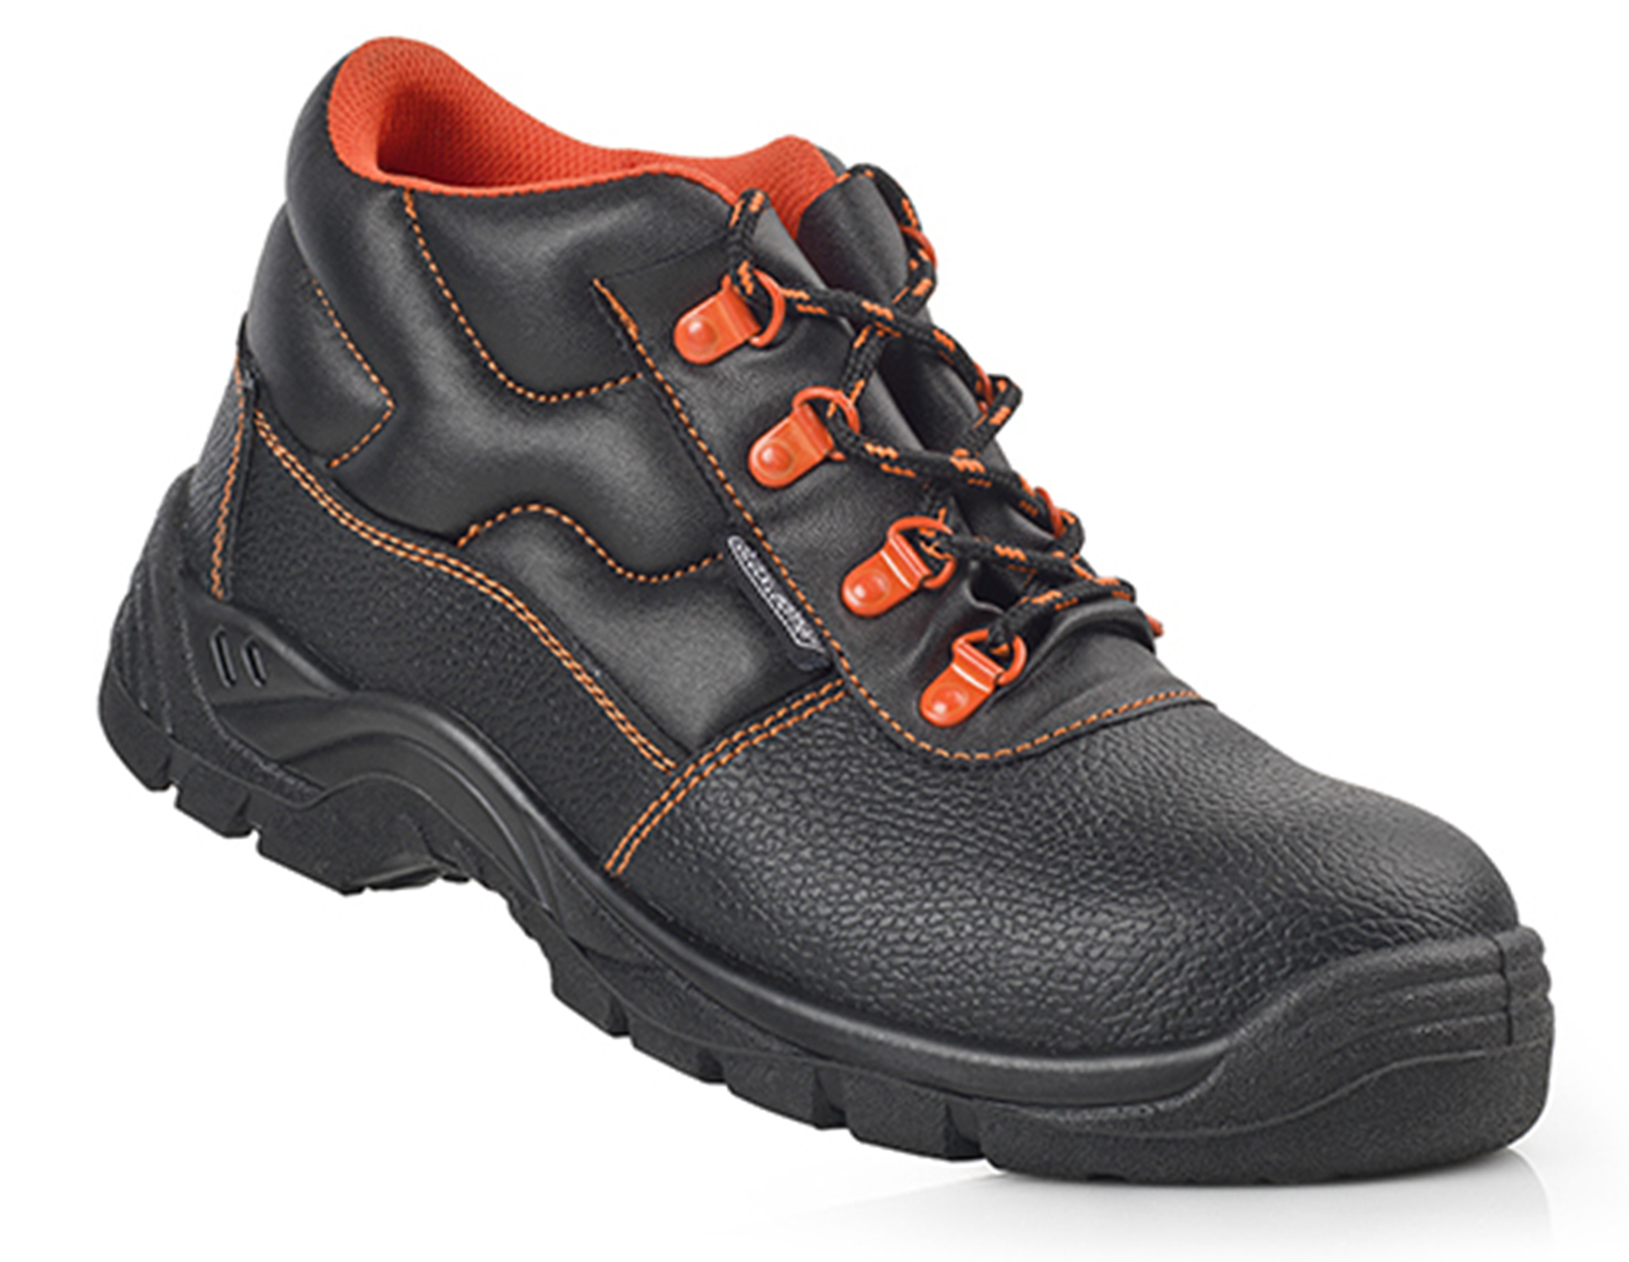 BECO1 Safety Footwear  BlackLeather Boot mod. BECO1 (S3 SRC E A).